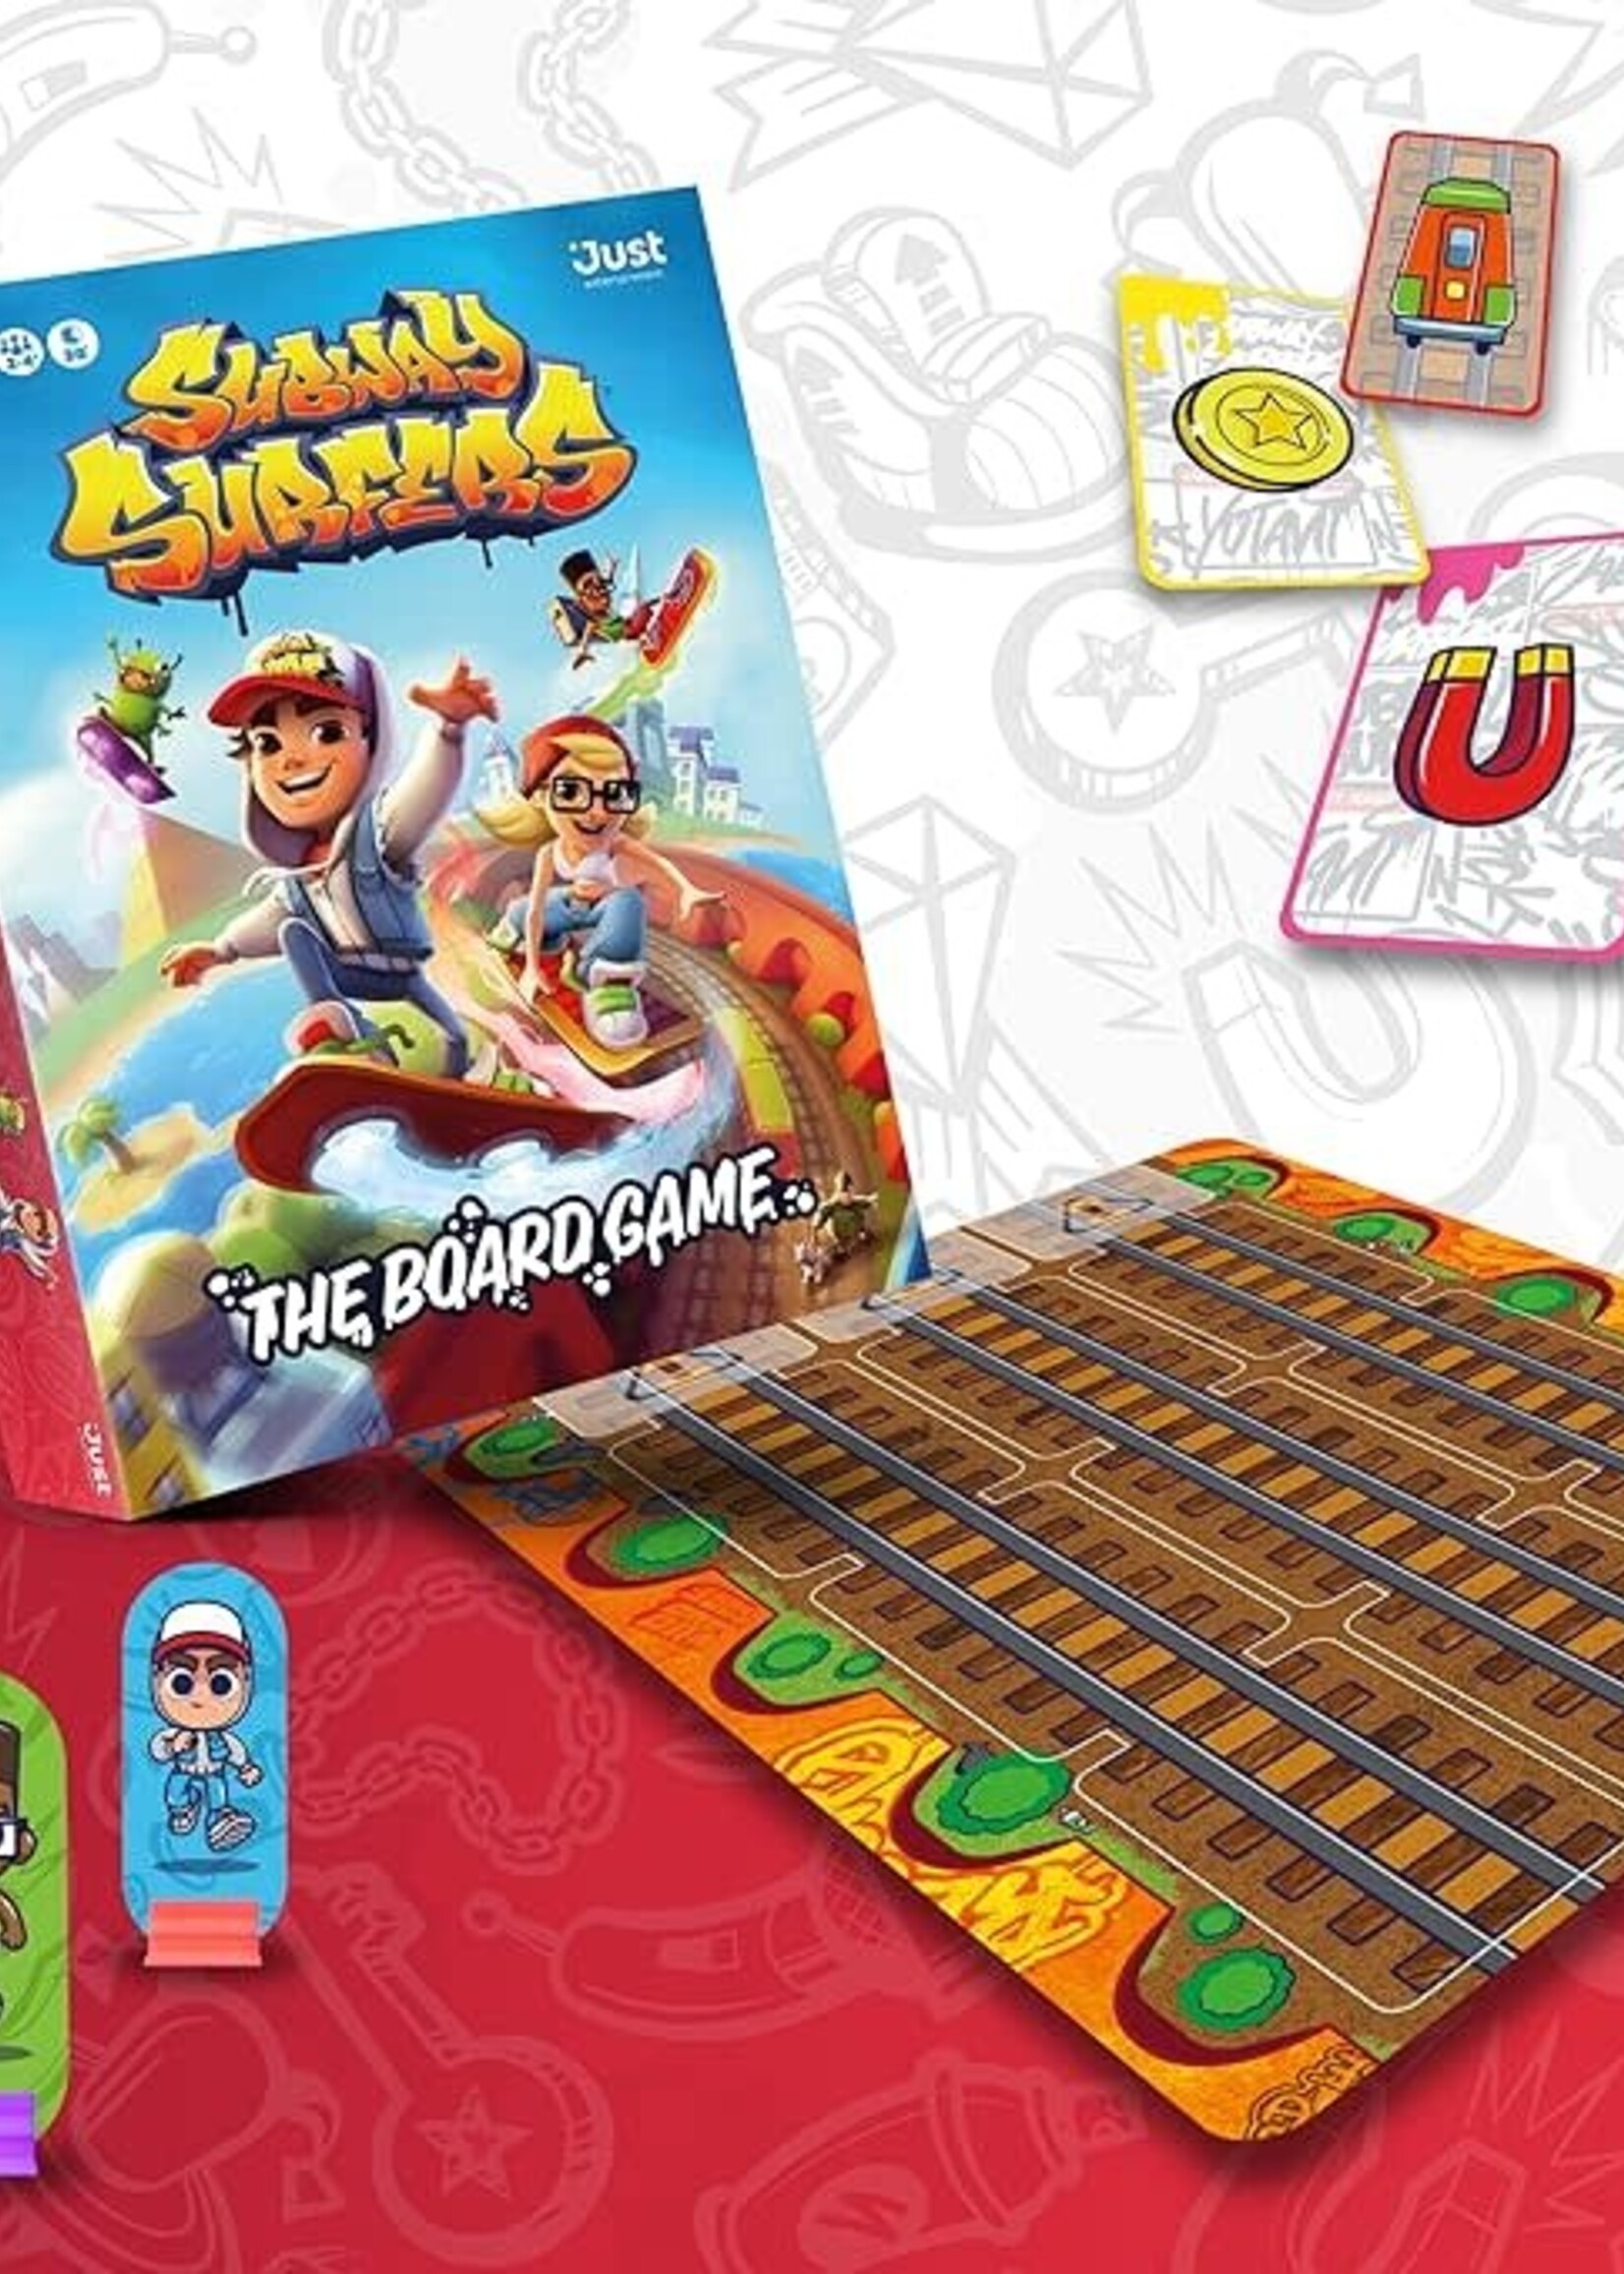 Subway Surfers: The Board Game